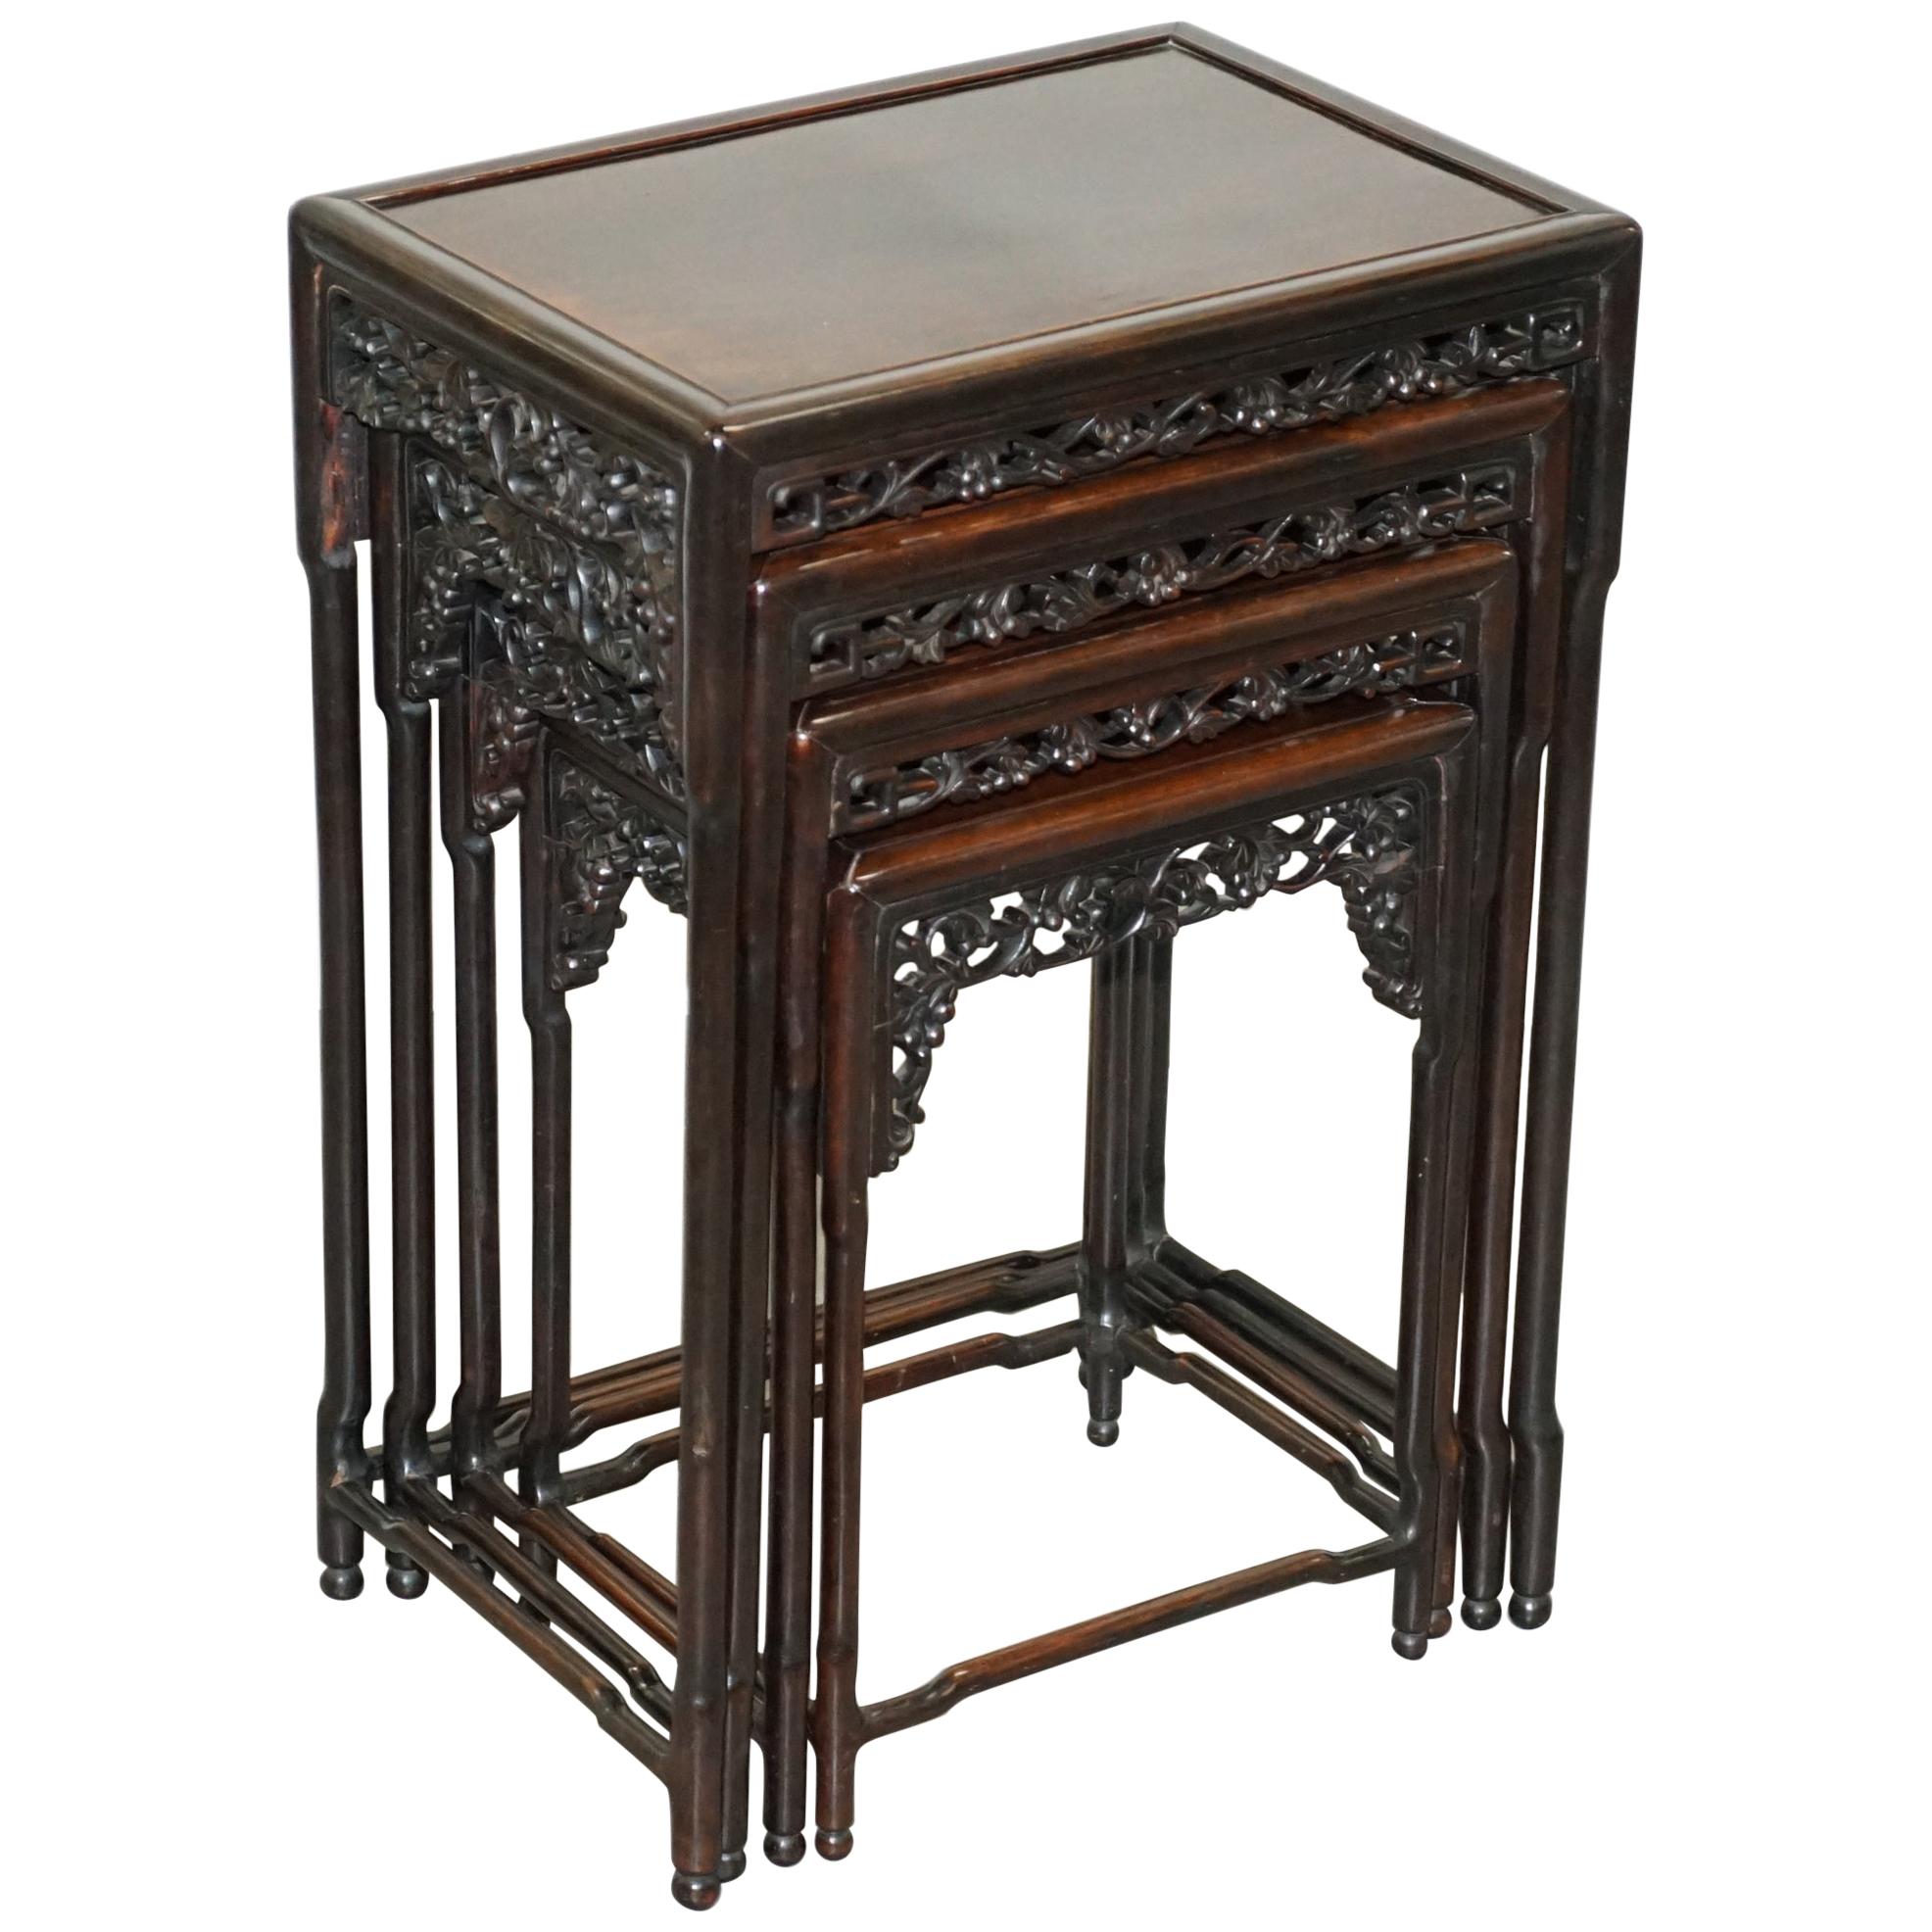 19th Century Chinese Hardwood Nest of Tables Heavily Fret Work Carved Floral